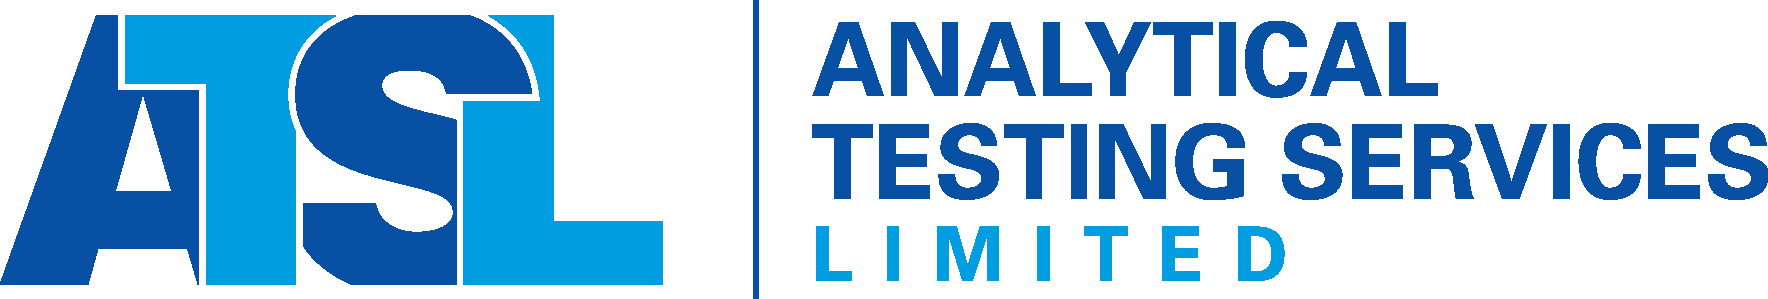 Analytical Testing Services Limited